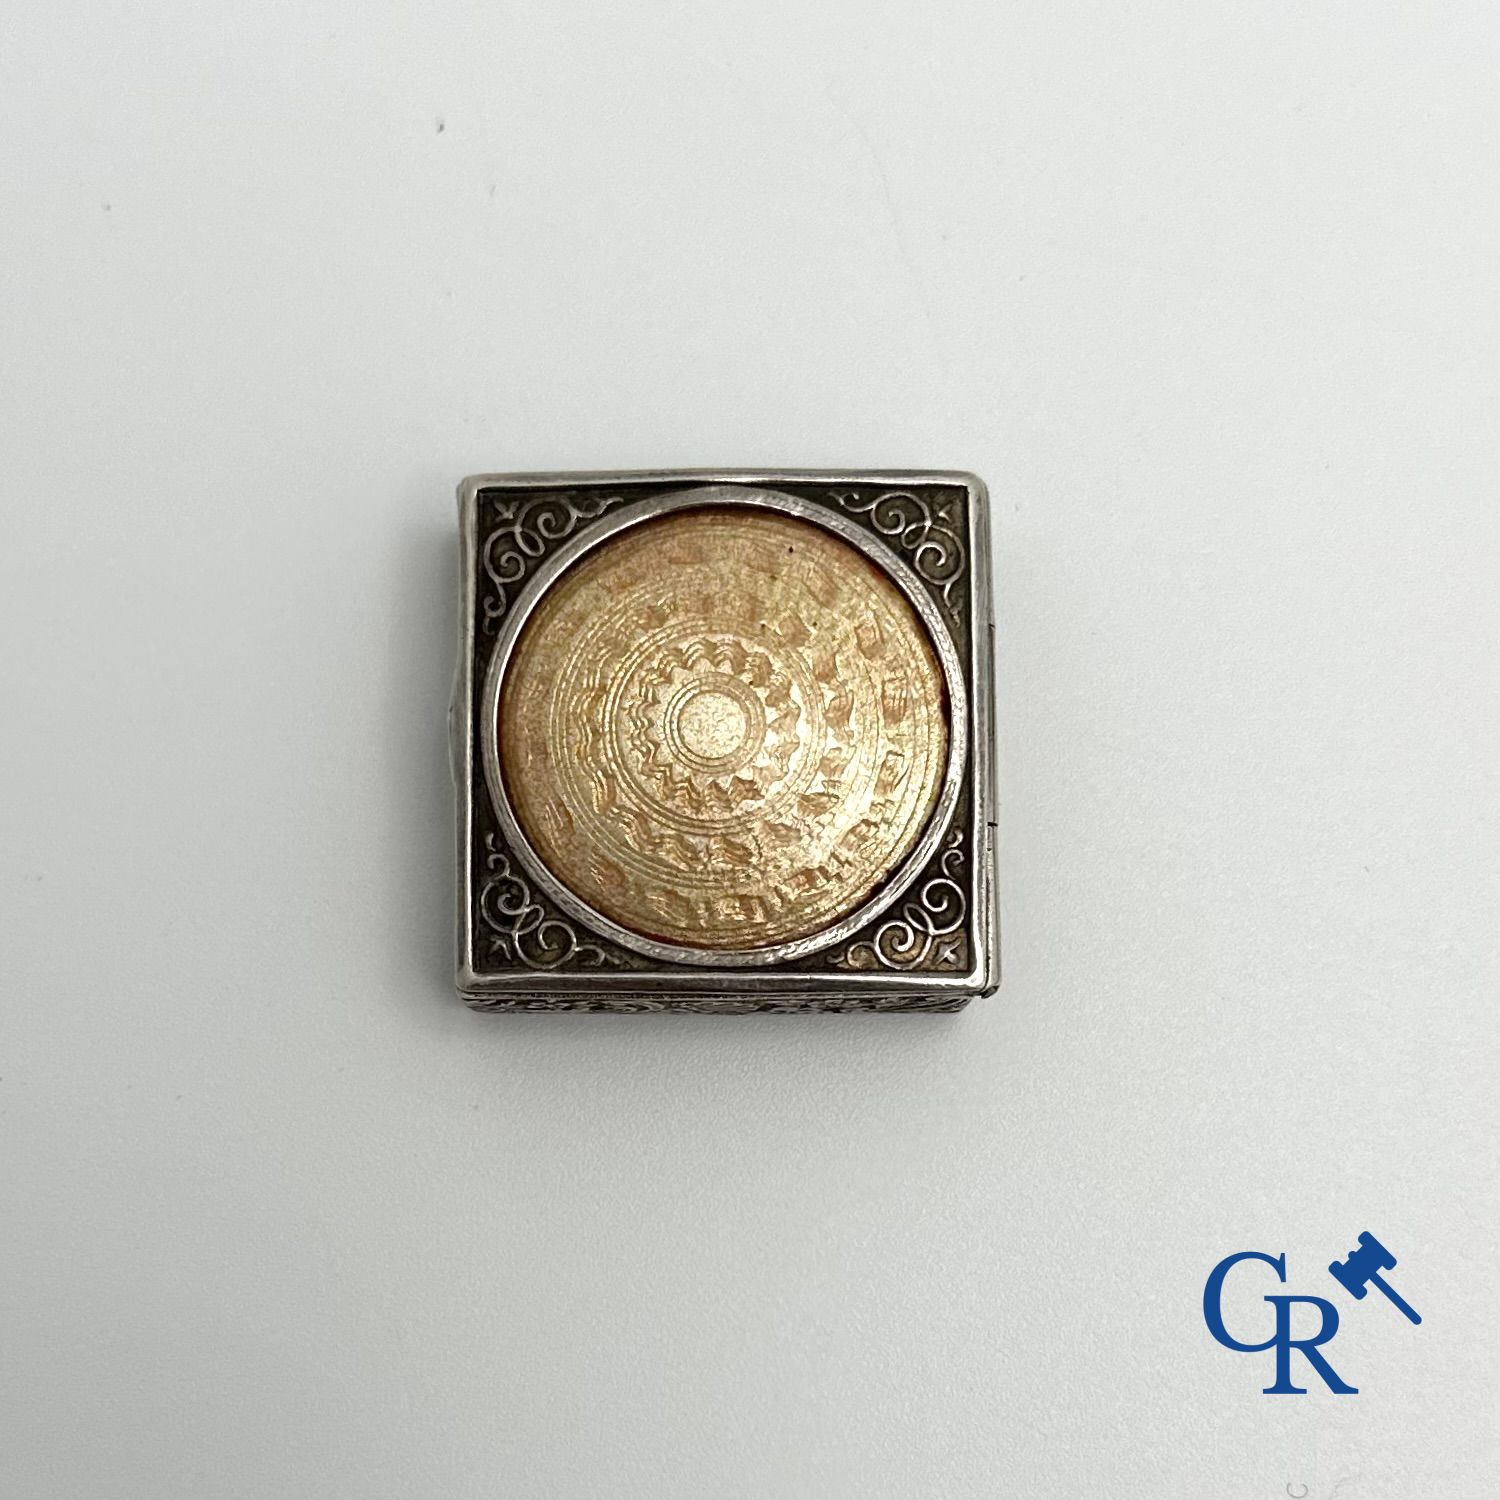 Jewellery: Russian work: Lot consisting of a pendant in gold , a pill box and cufflinks in silver. - Image 3 of 5